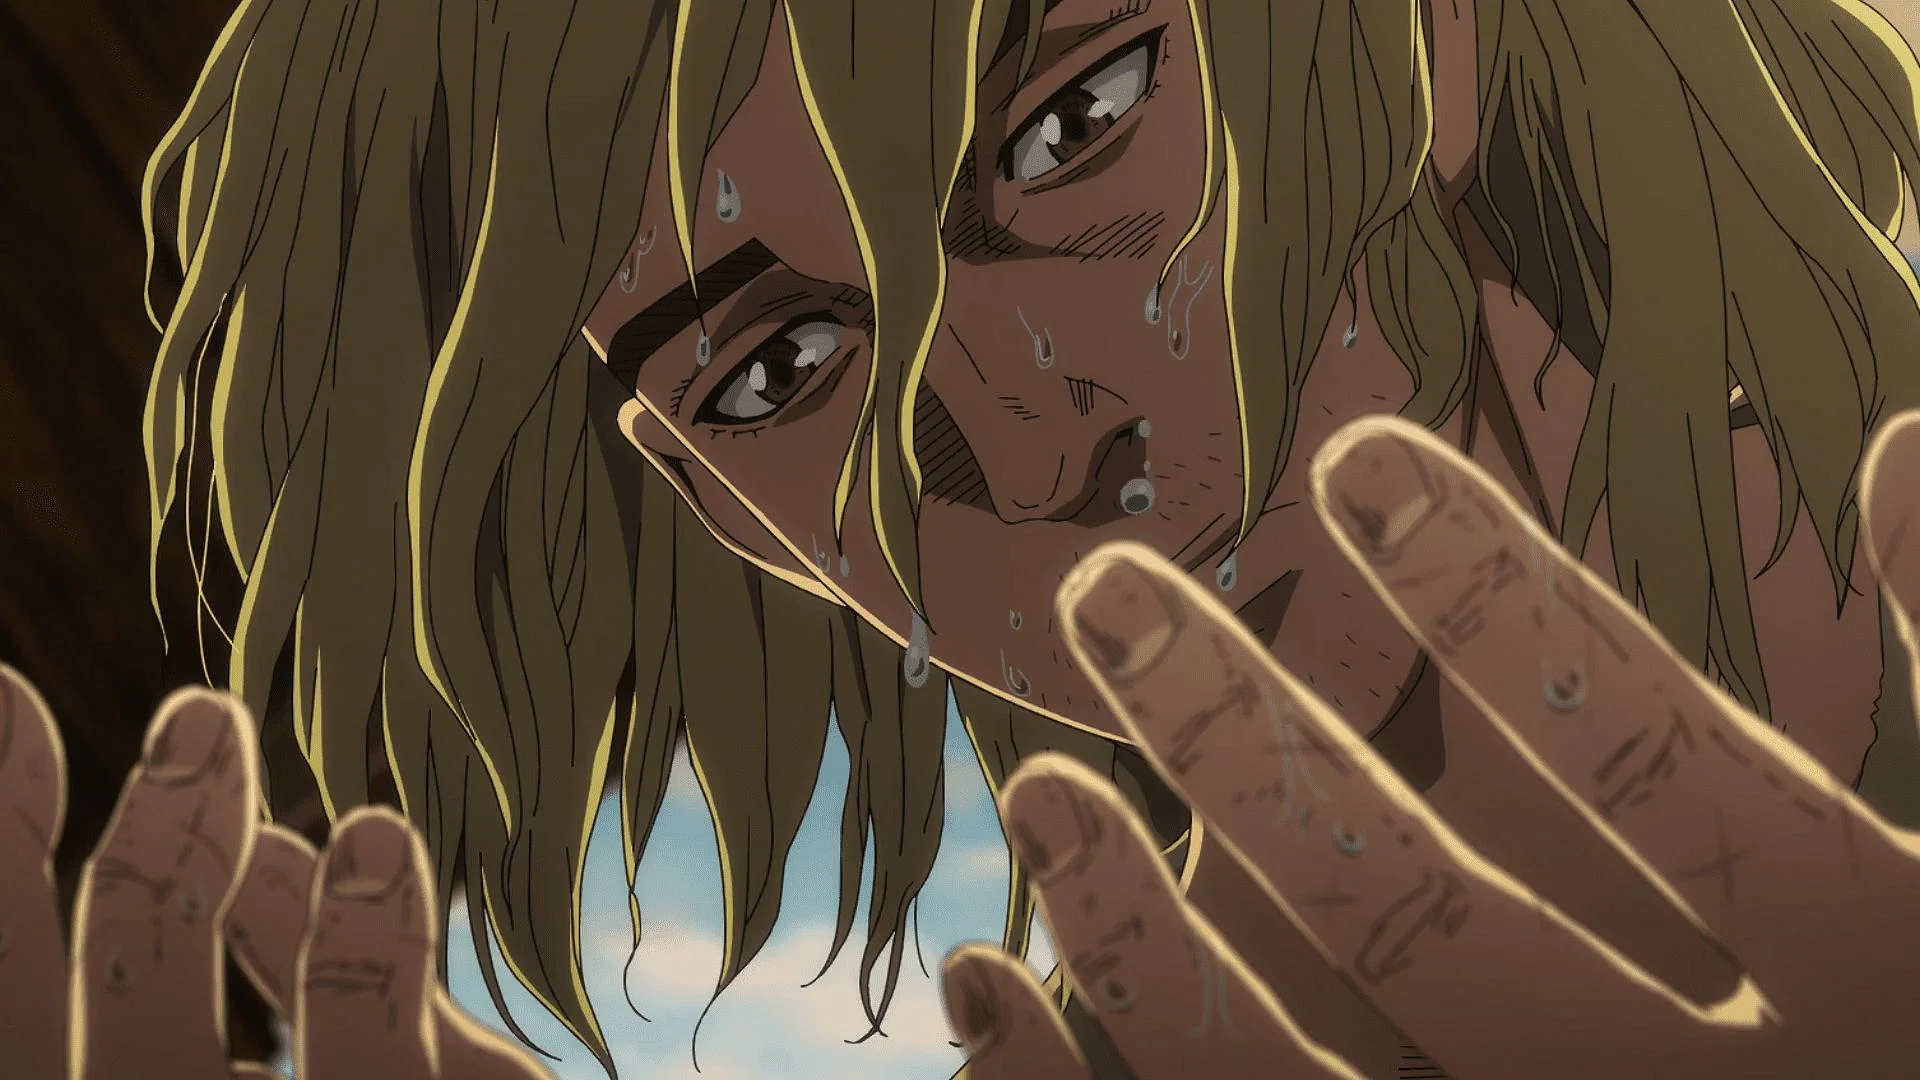 Adult Thorfinn with no emotions or dreams left.